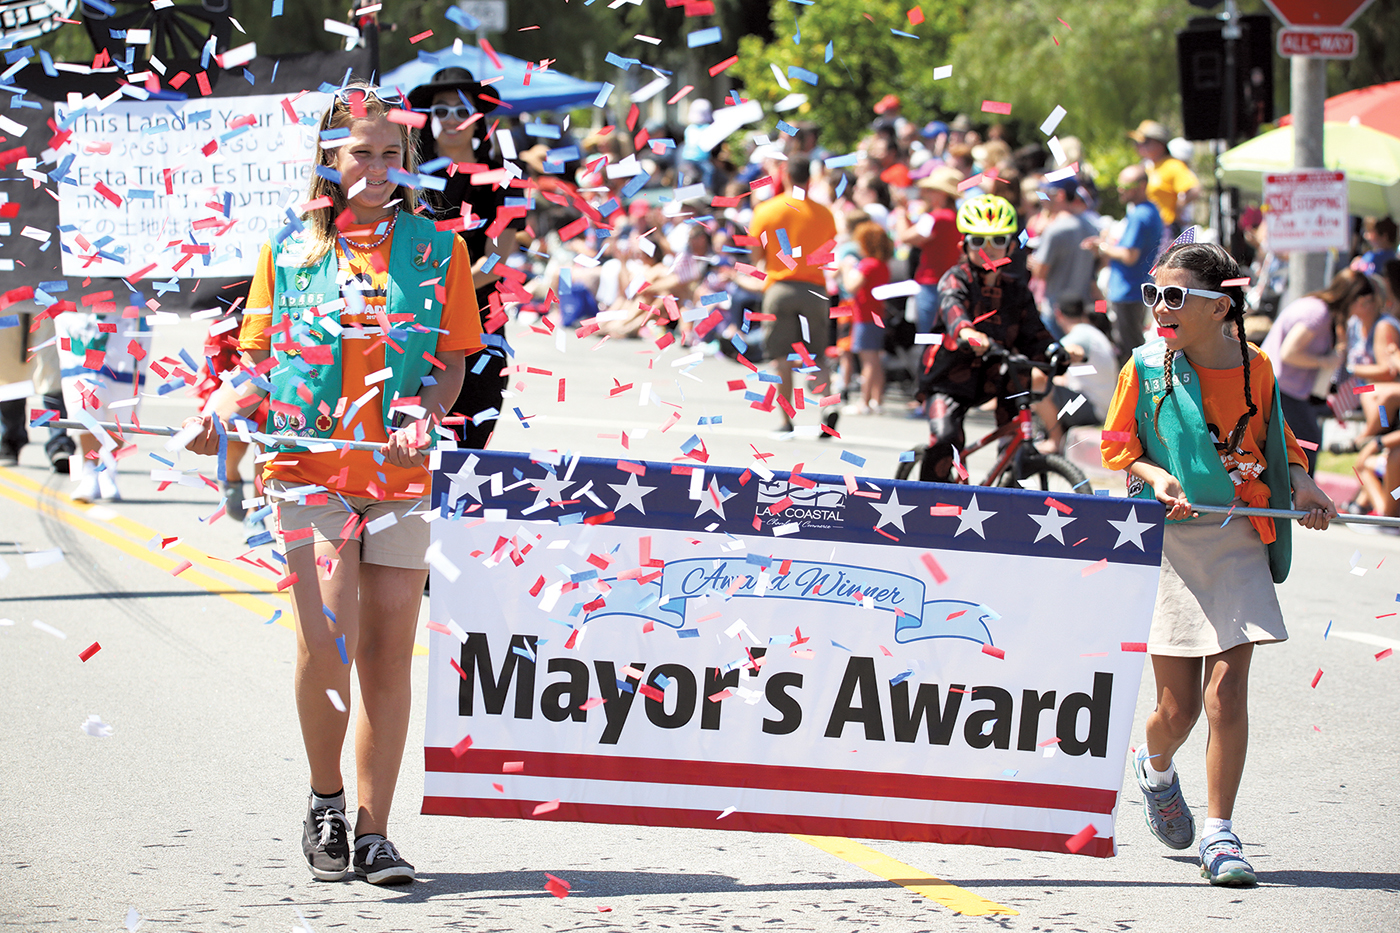 “Cities Across America” floats, marching groups, entries sought for Fourth of July Parade